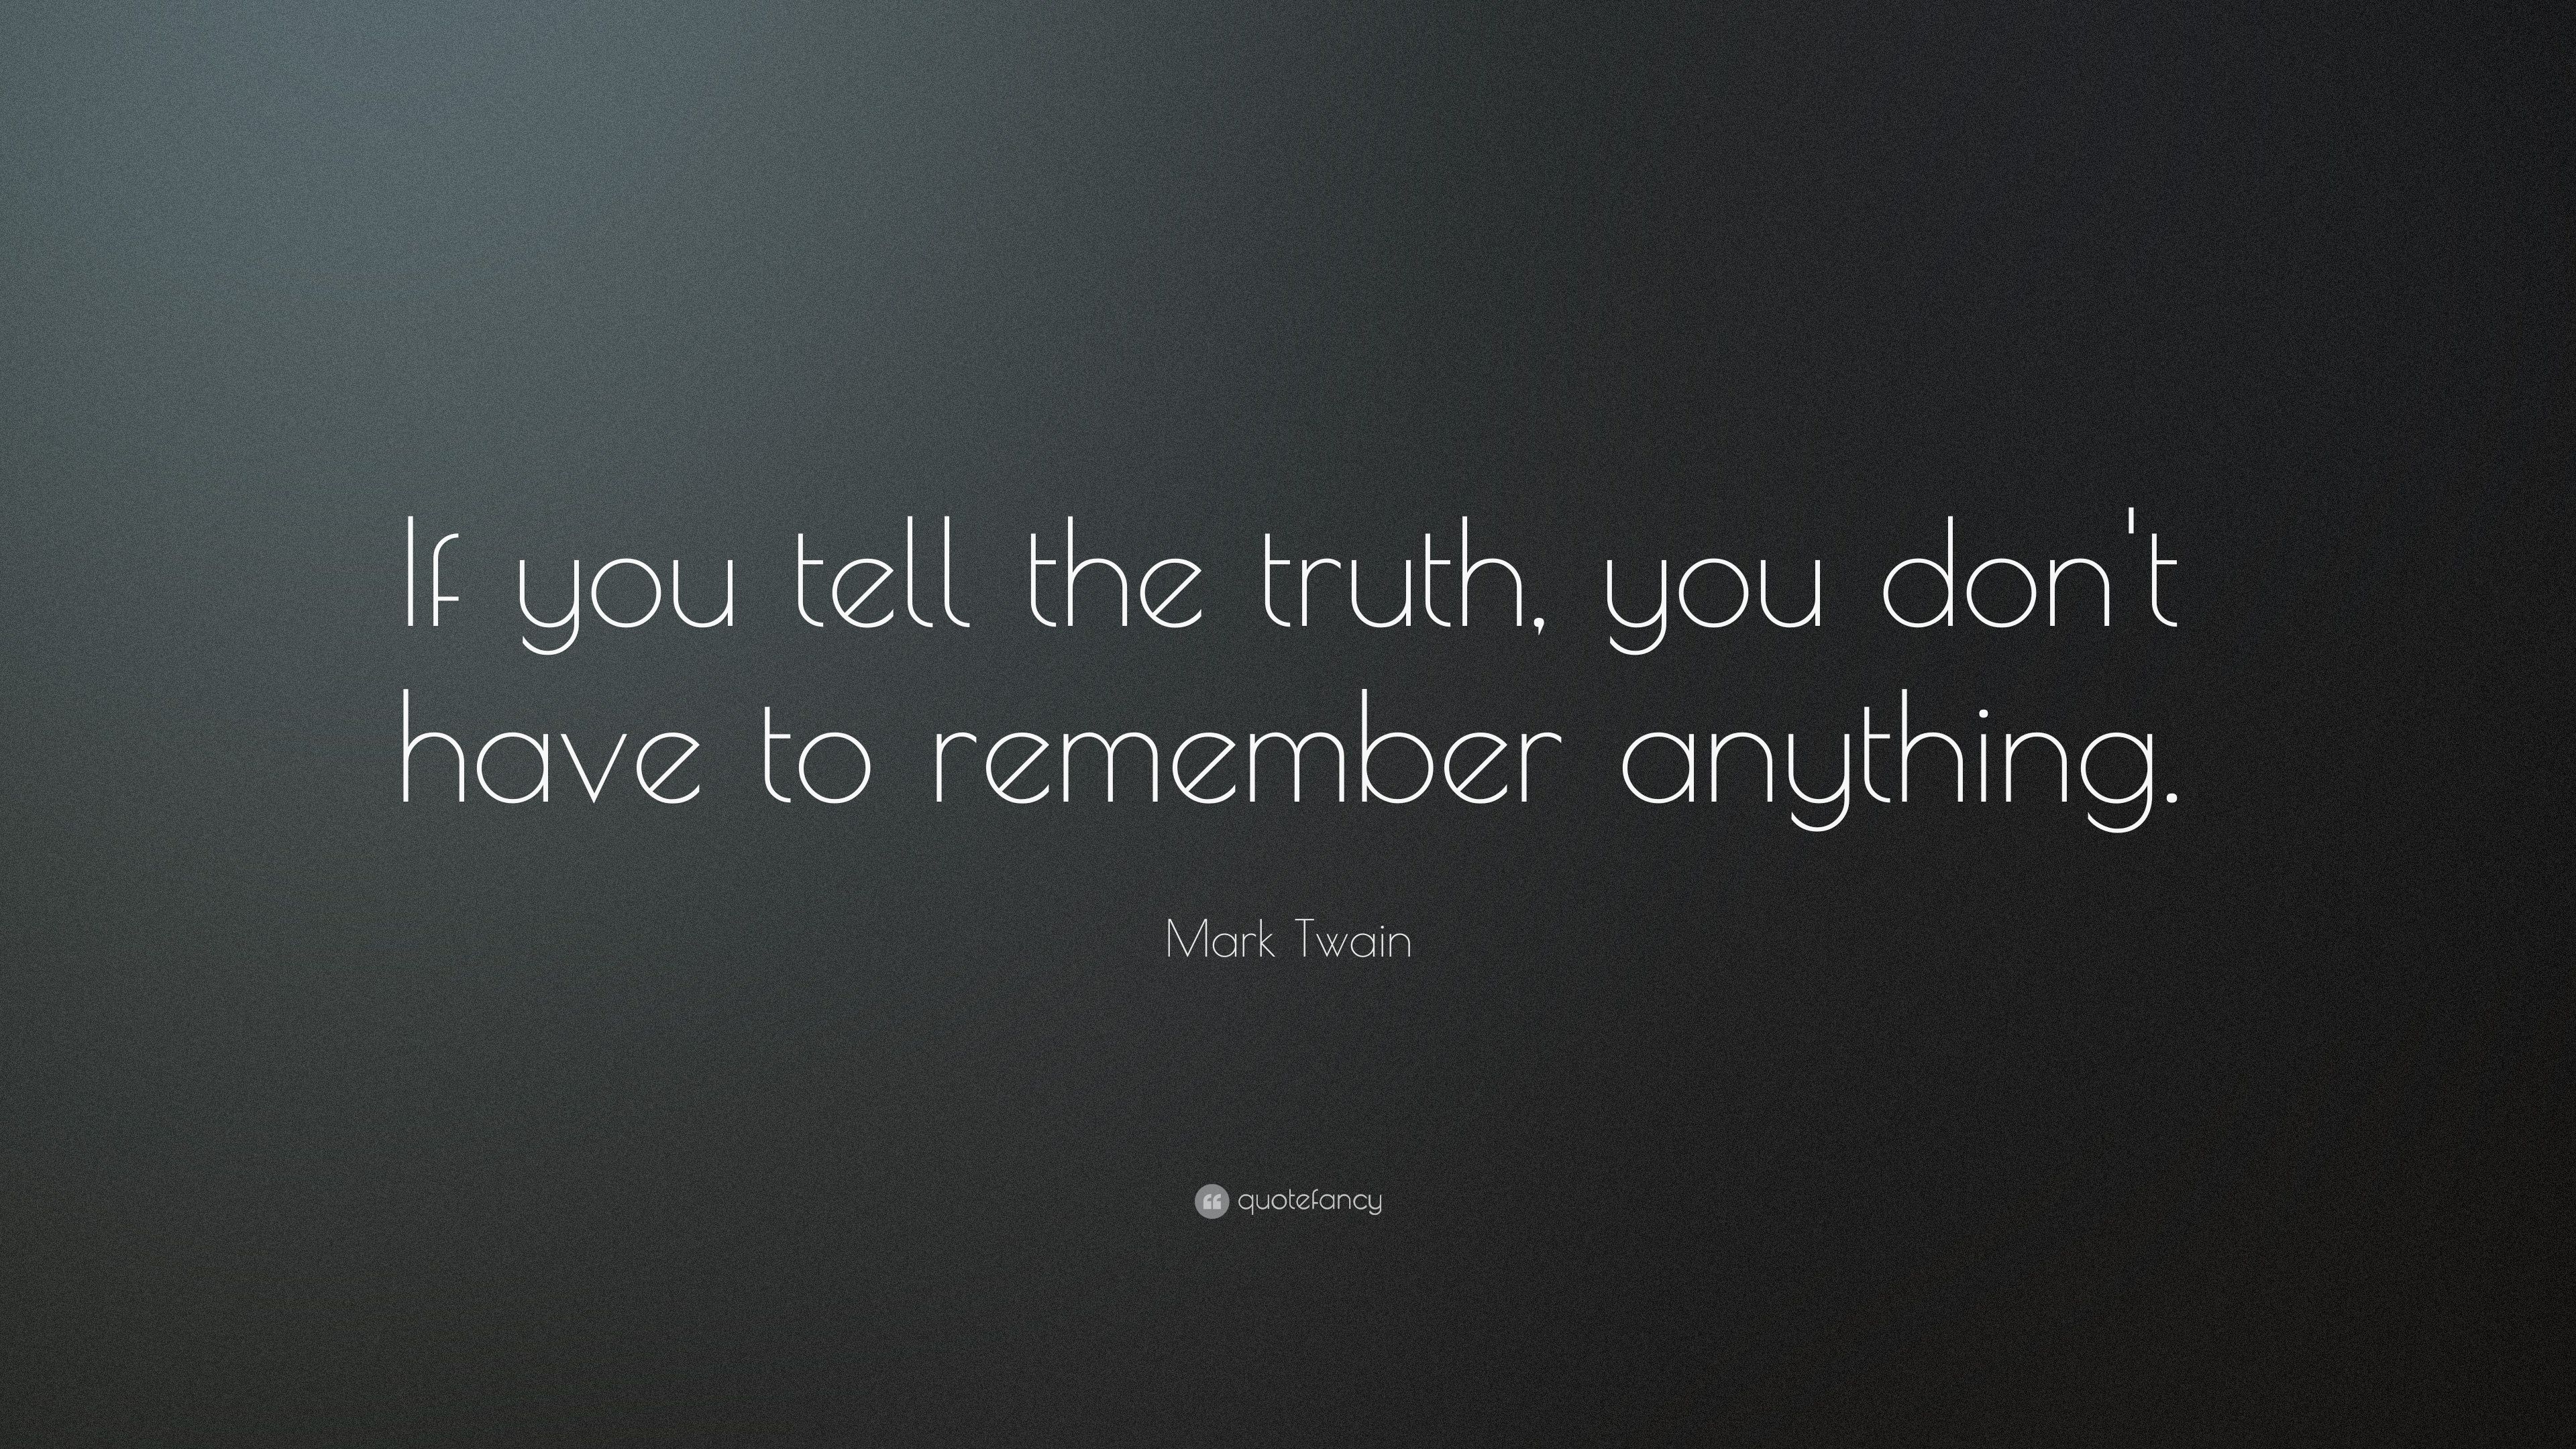 Mark Twain Quote: “If you tell the truth, you don't have to